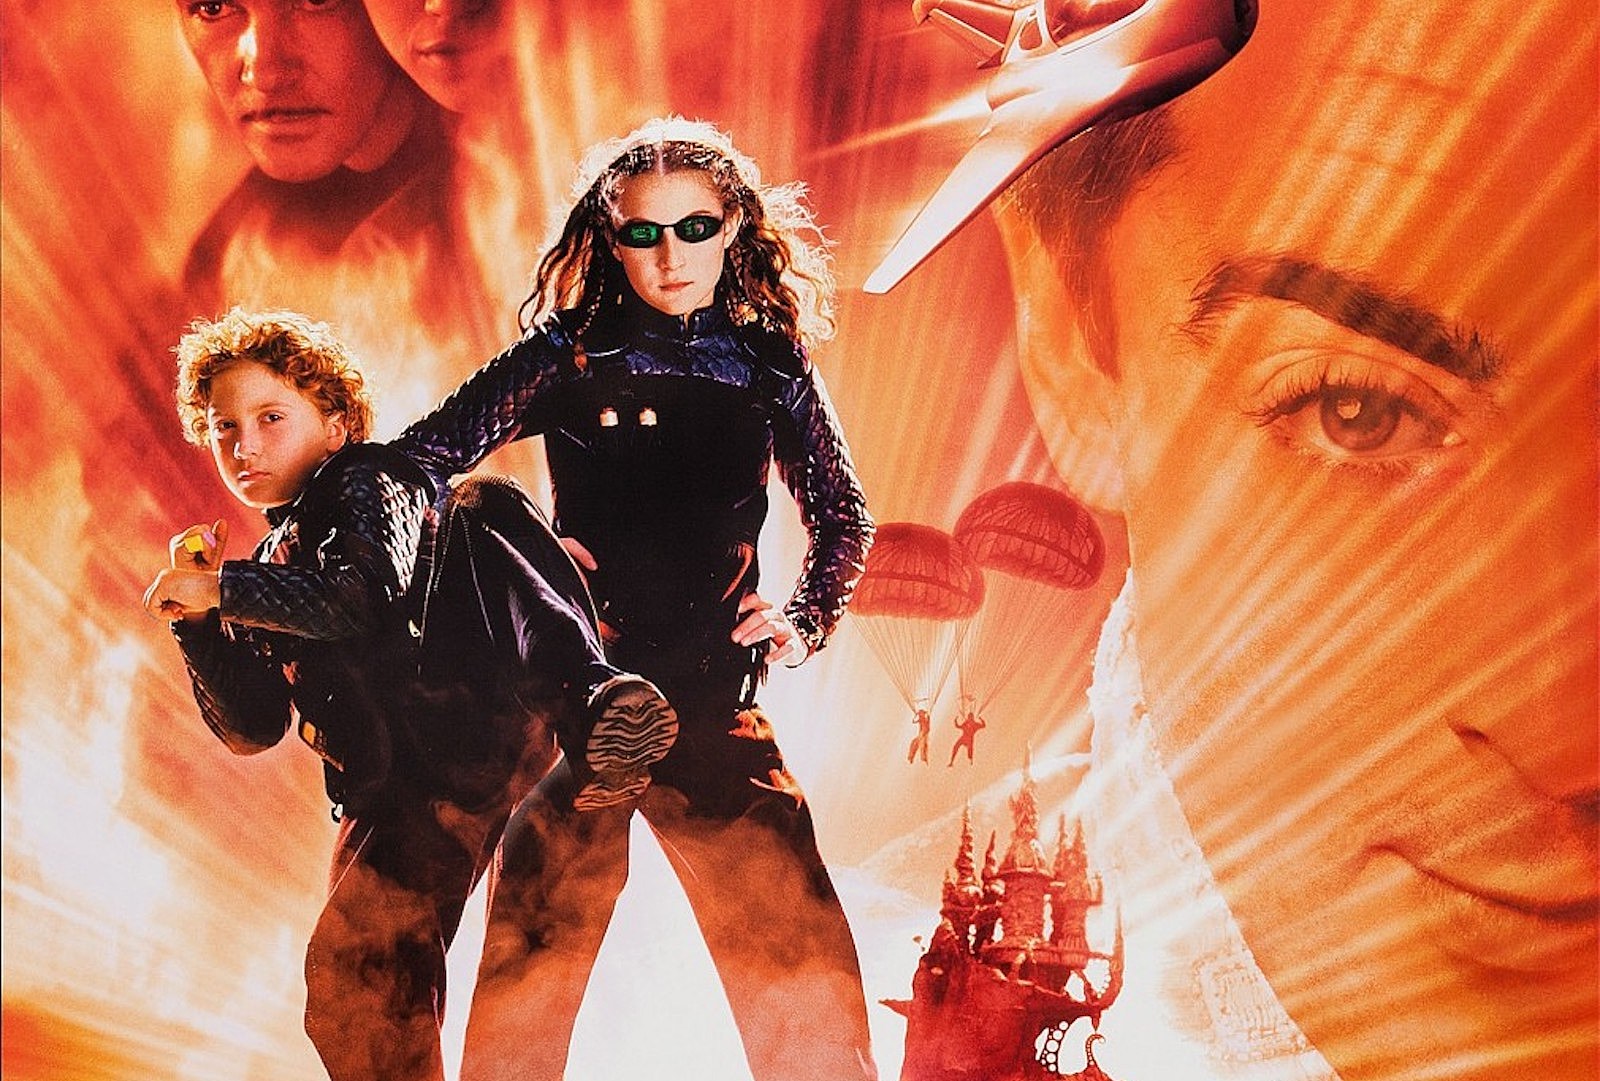 What to Watch in July - Spy Kids